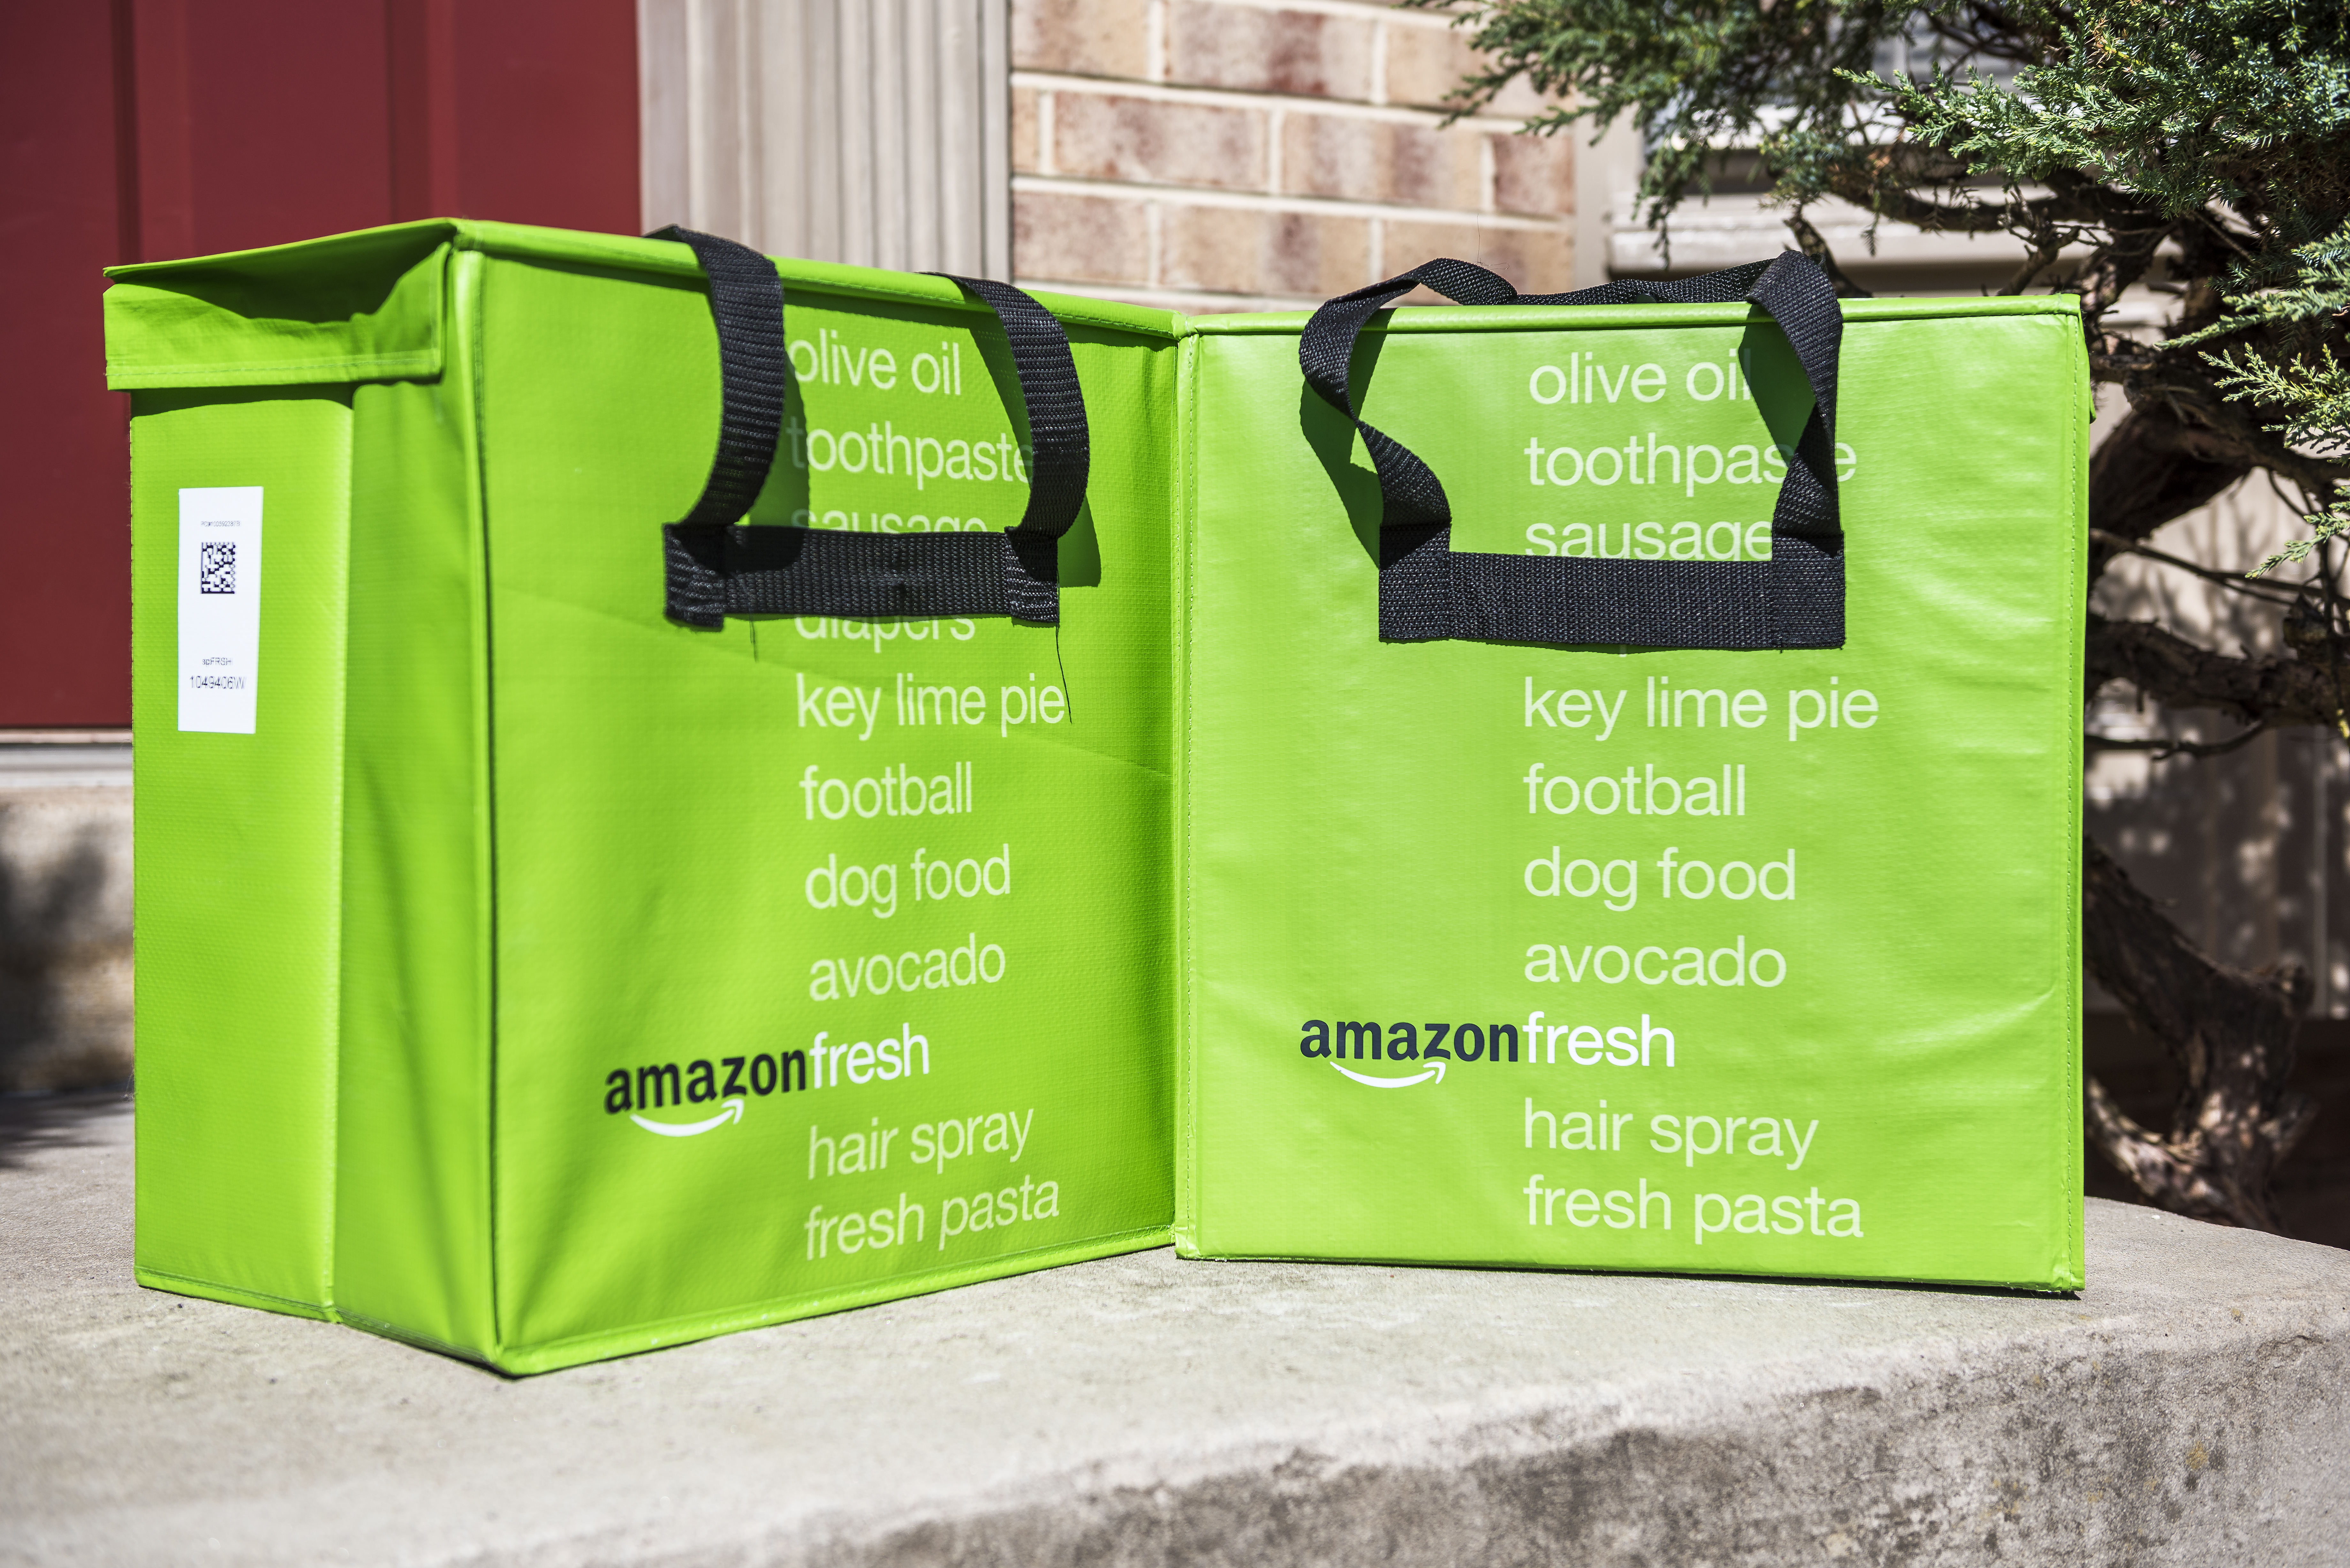 Amazon Prime Members Can Now Get Groceries Delivered for Free